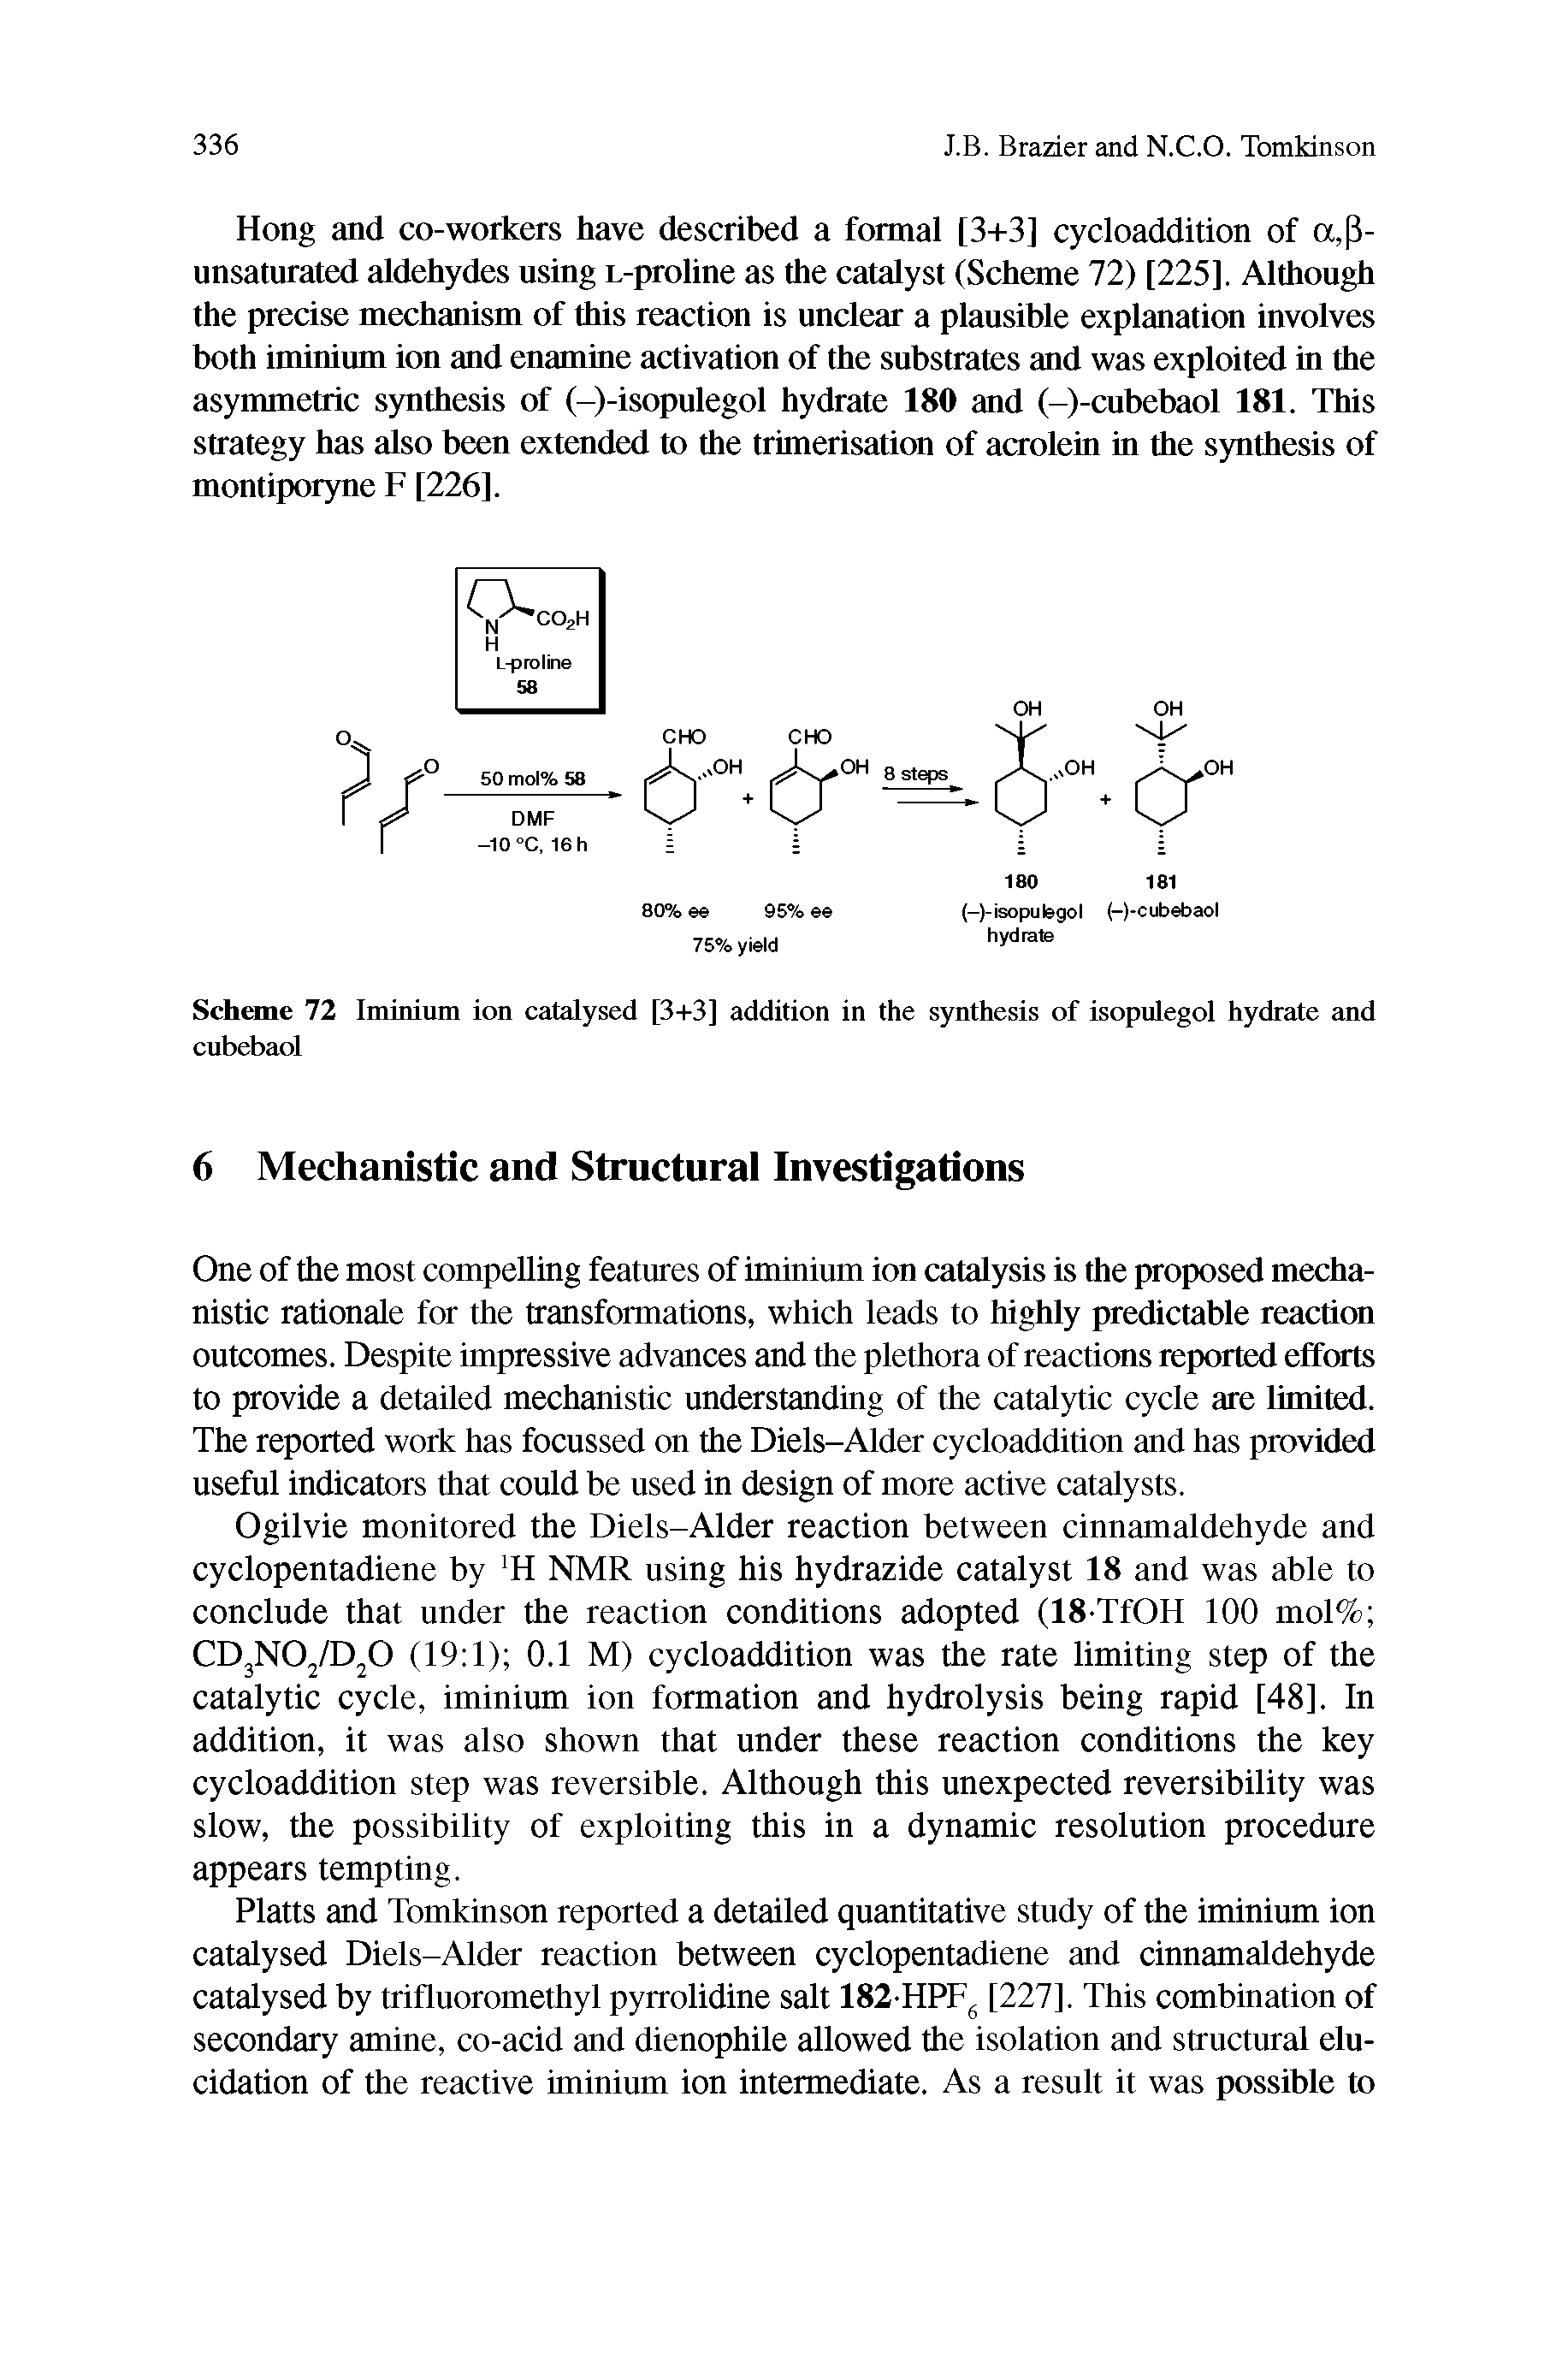 Scheme 72 Iminium ion catalysed [3+3] addition in the synthesis of isopulegol hydrate and cubebaol...